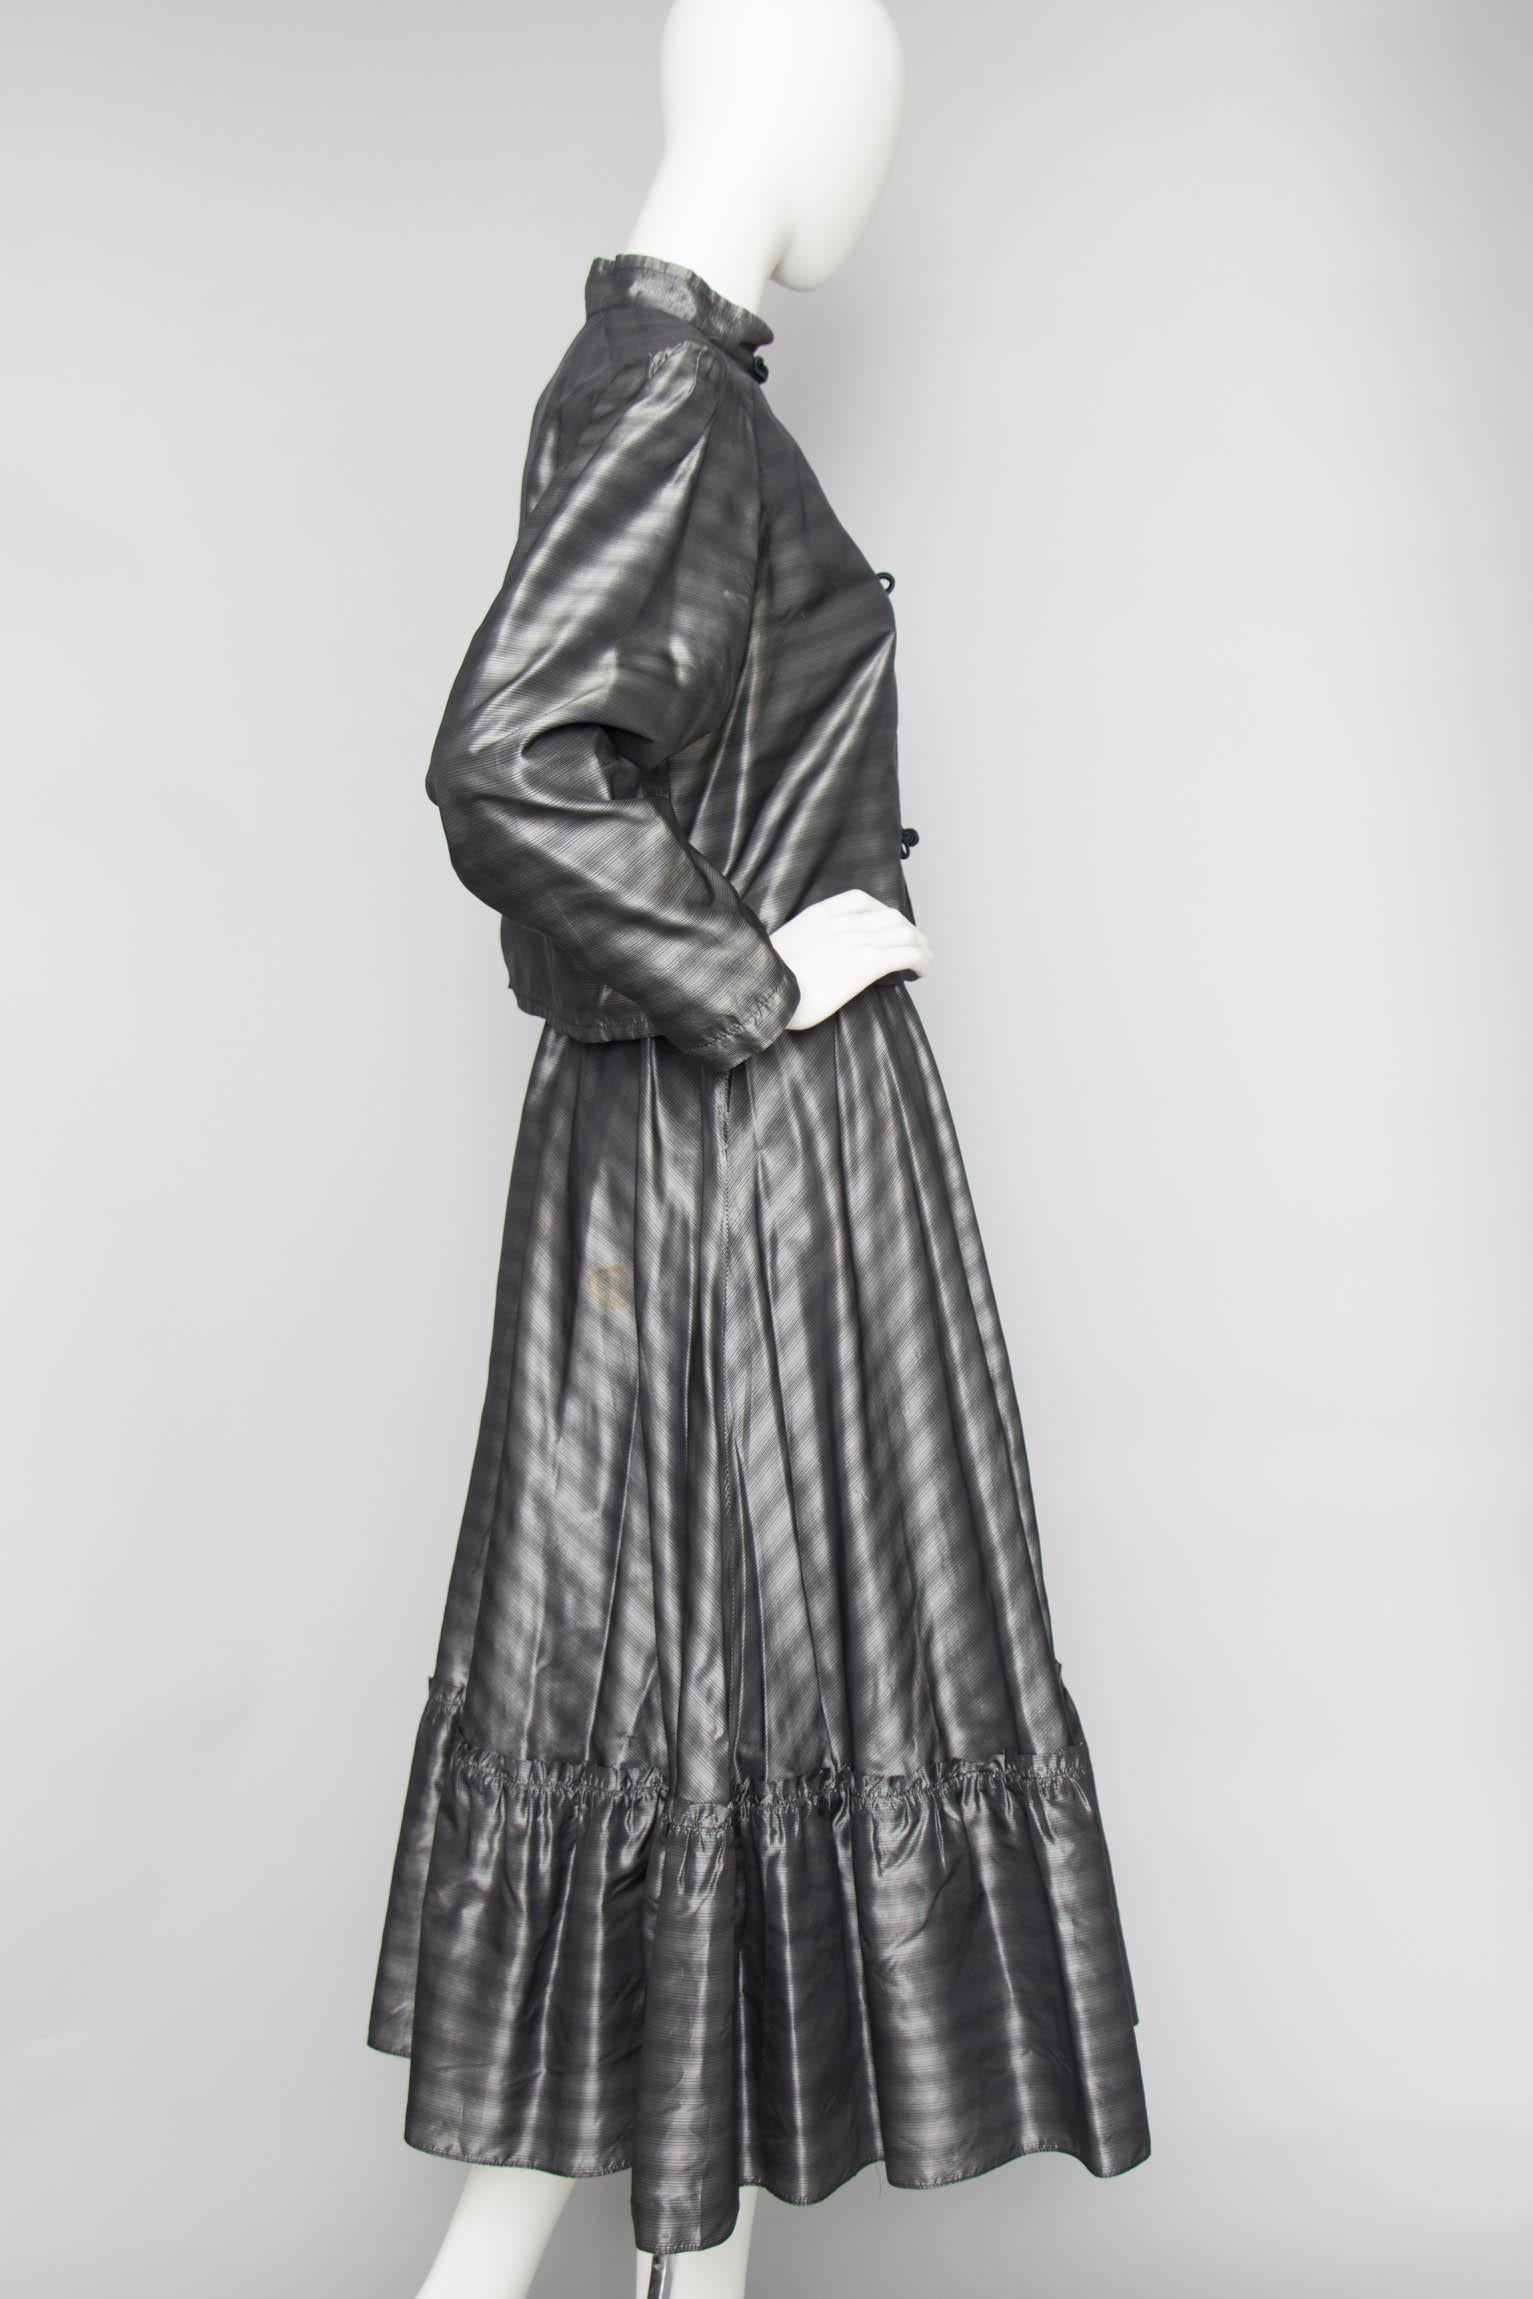 A 1970s Ted Lapidus silver taffeta ensemble consisting of a jacket and flared skirt with a ruffle hemline. and a blouse with puffed shoulders, tapered sleeves, a high collar, and knot buttons. The Item is fully lined.

The size of the ensemble